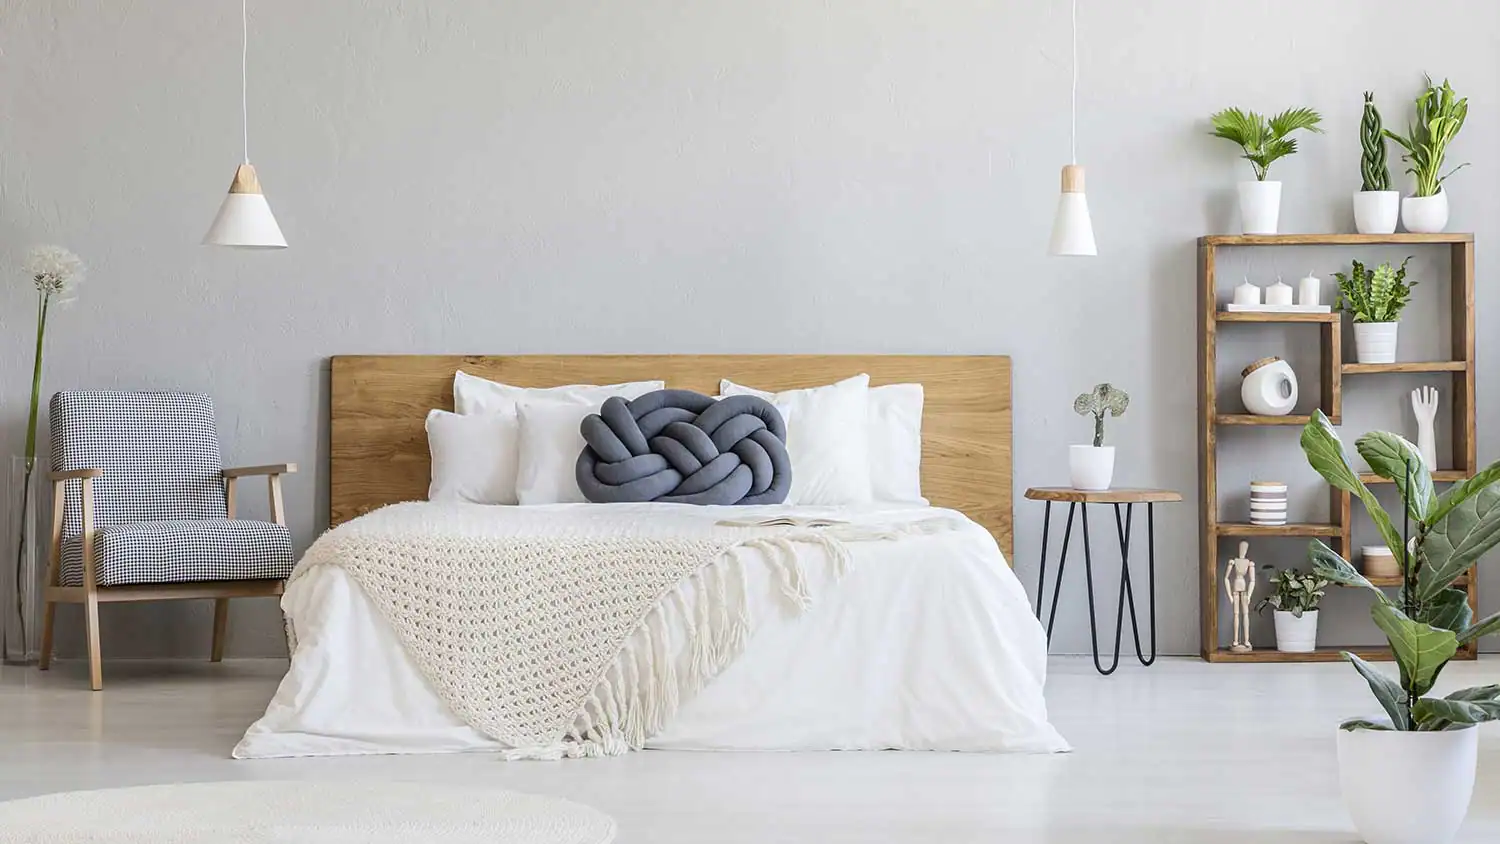 Make Your Bedroom a More Restful and Peaceful Space!